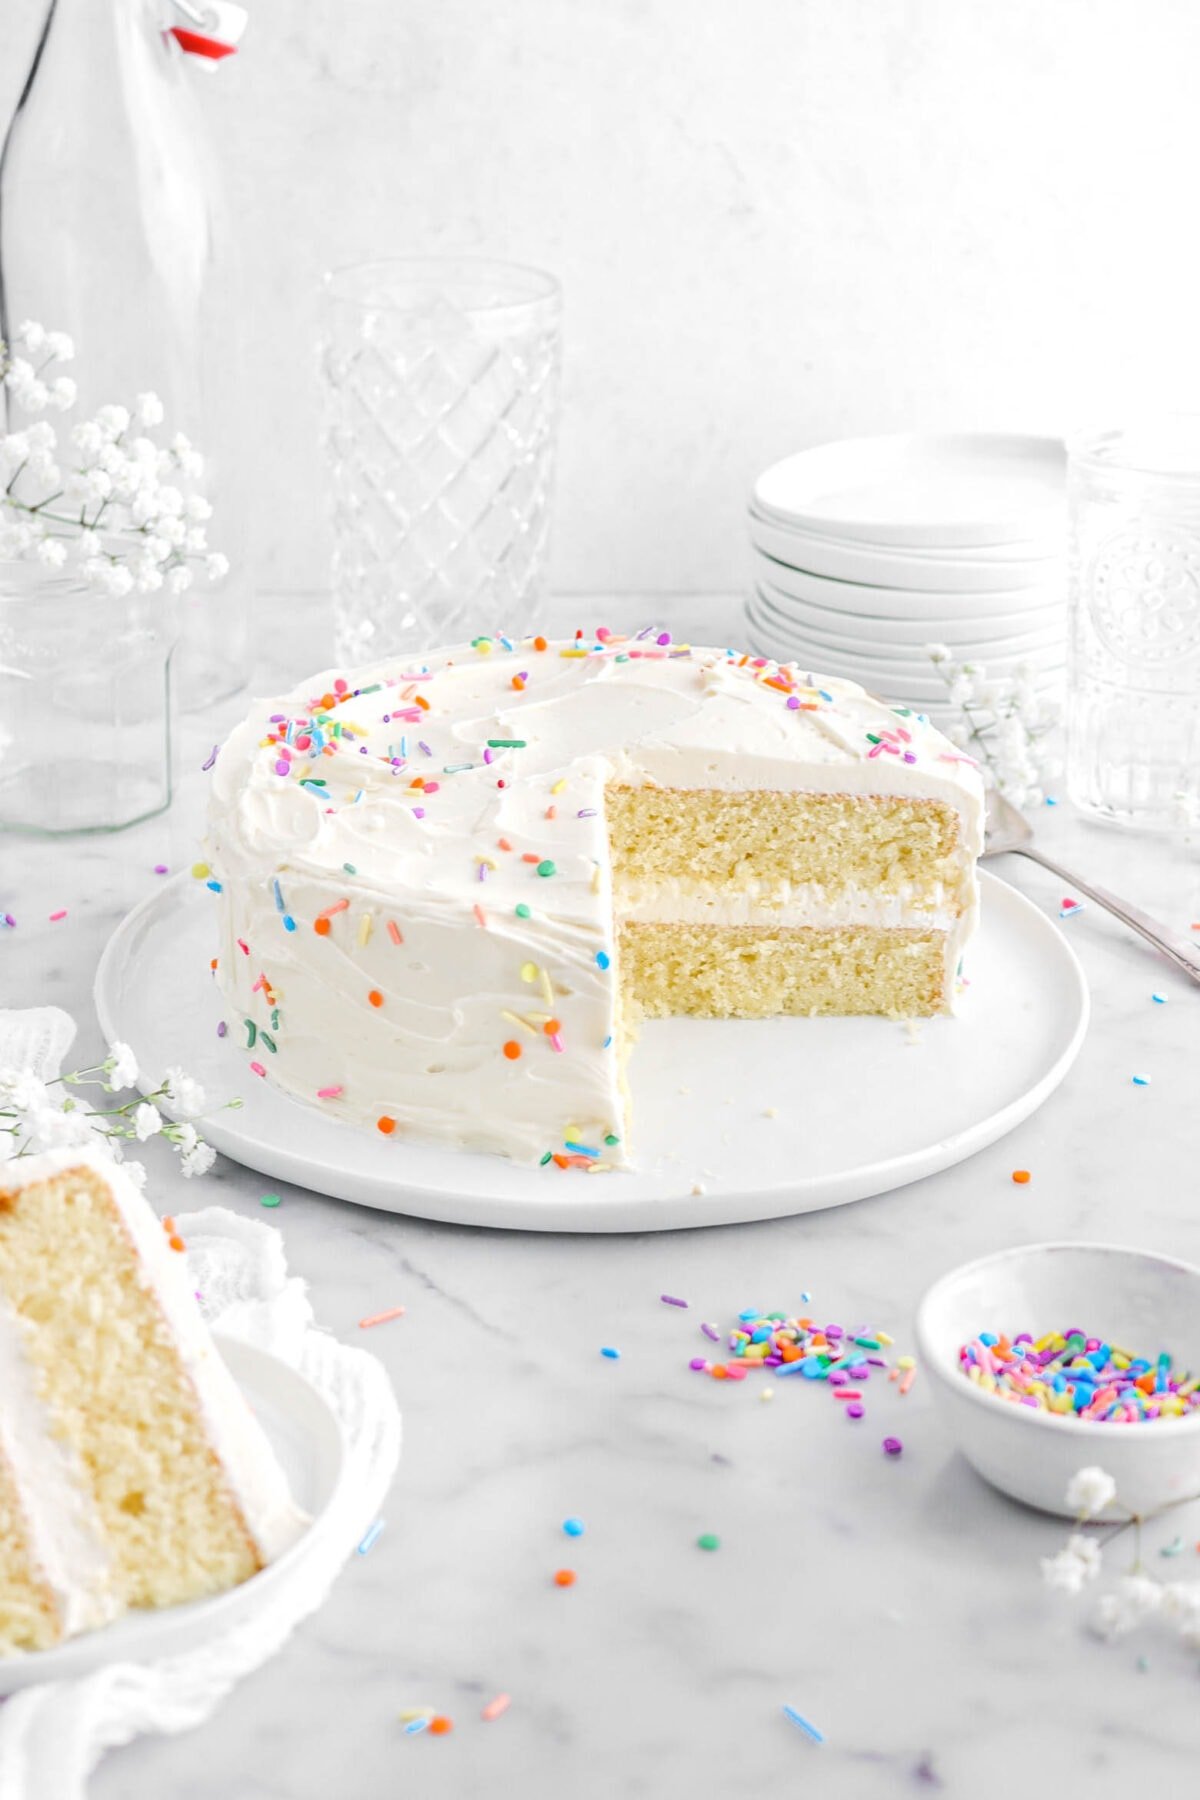 frosted vanilla cake on white plate with slice in front ons mall white plate on top of a white cheesecloth with sprinkles and white flowers around.